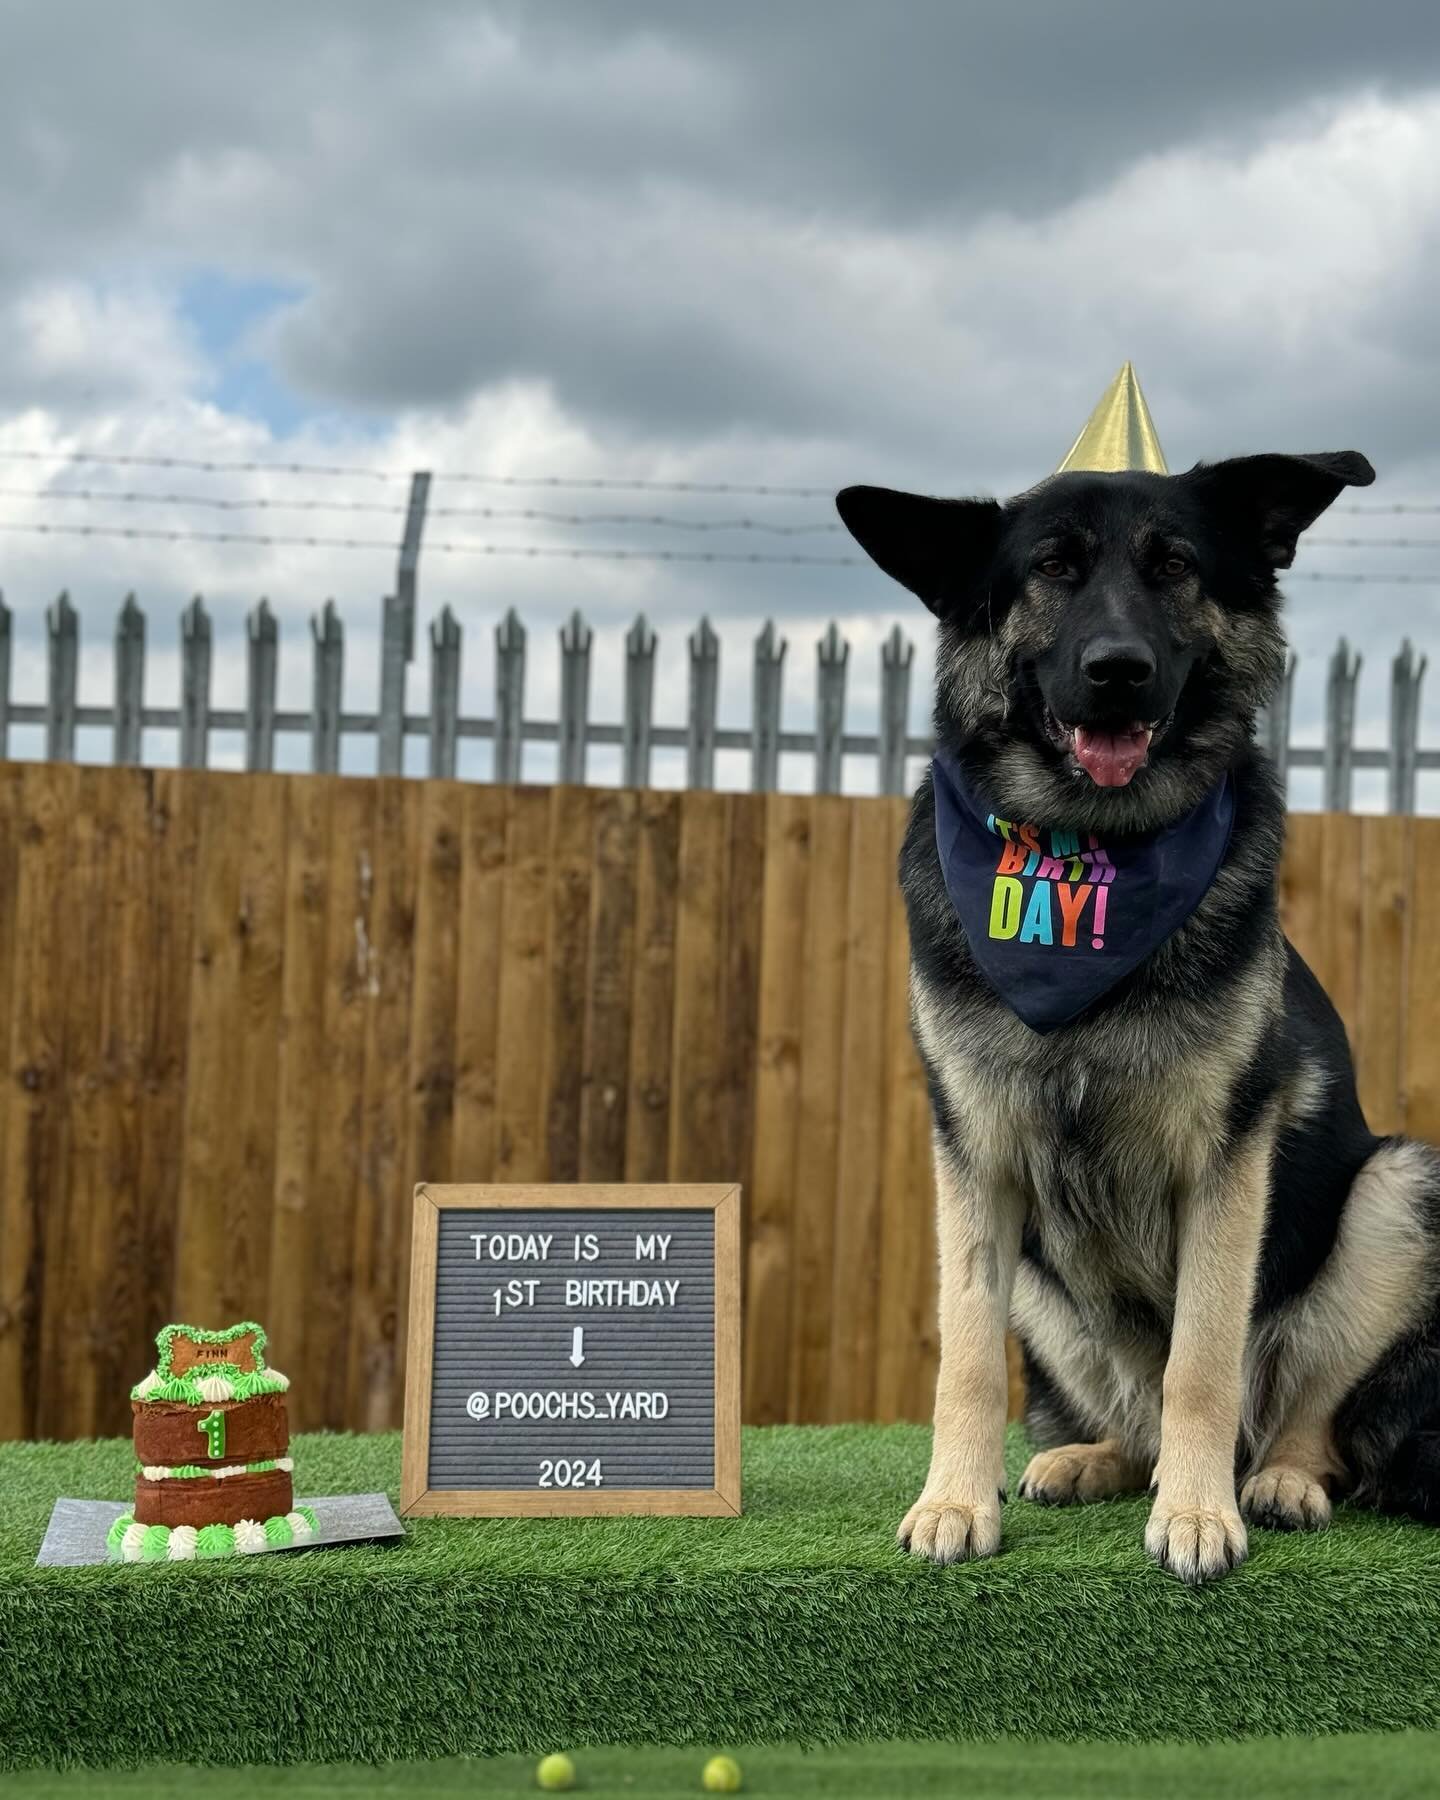 We have two birthday boys in the house today!
&mdash;
Finn turned one yesterday but it unfortunately landed on a bank holiday so therefore we just had to celebrate it today! He brought treats for his friends, there was cake, bubbles, balls the whole 